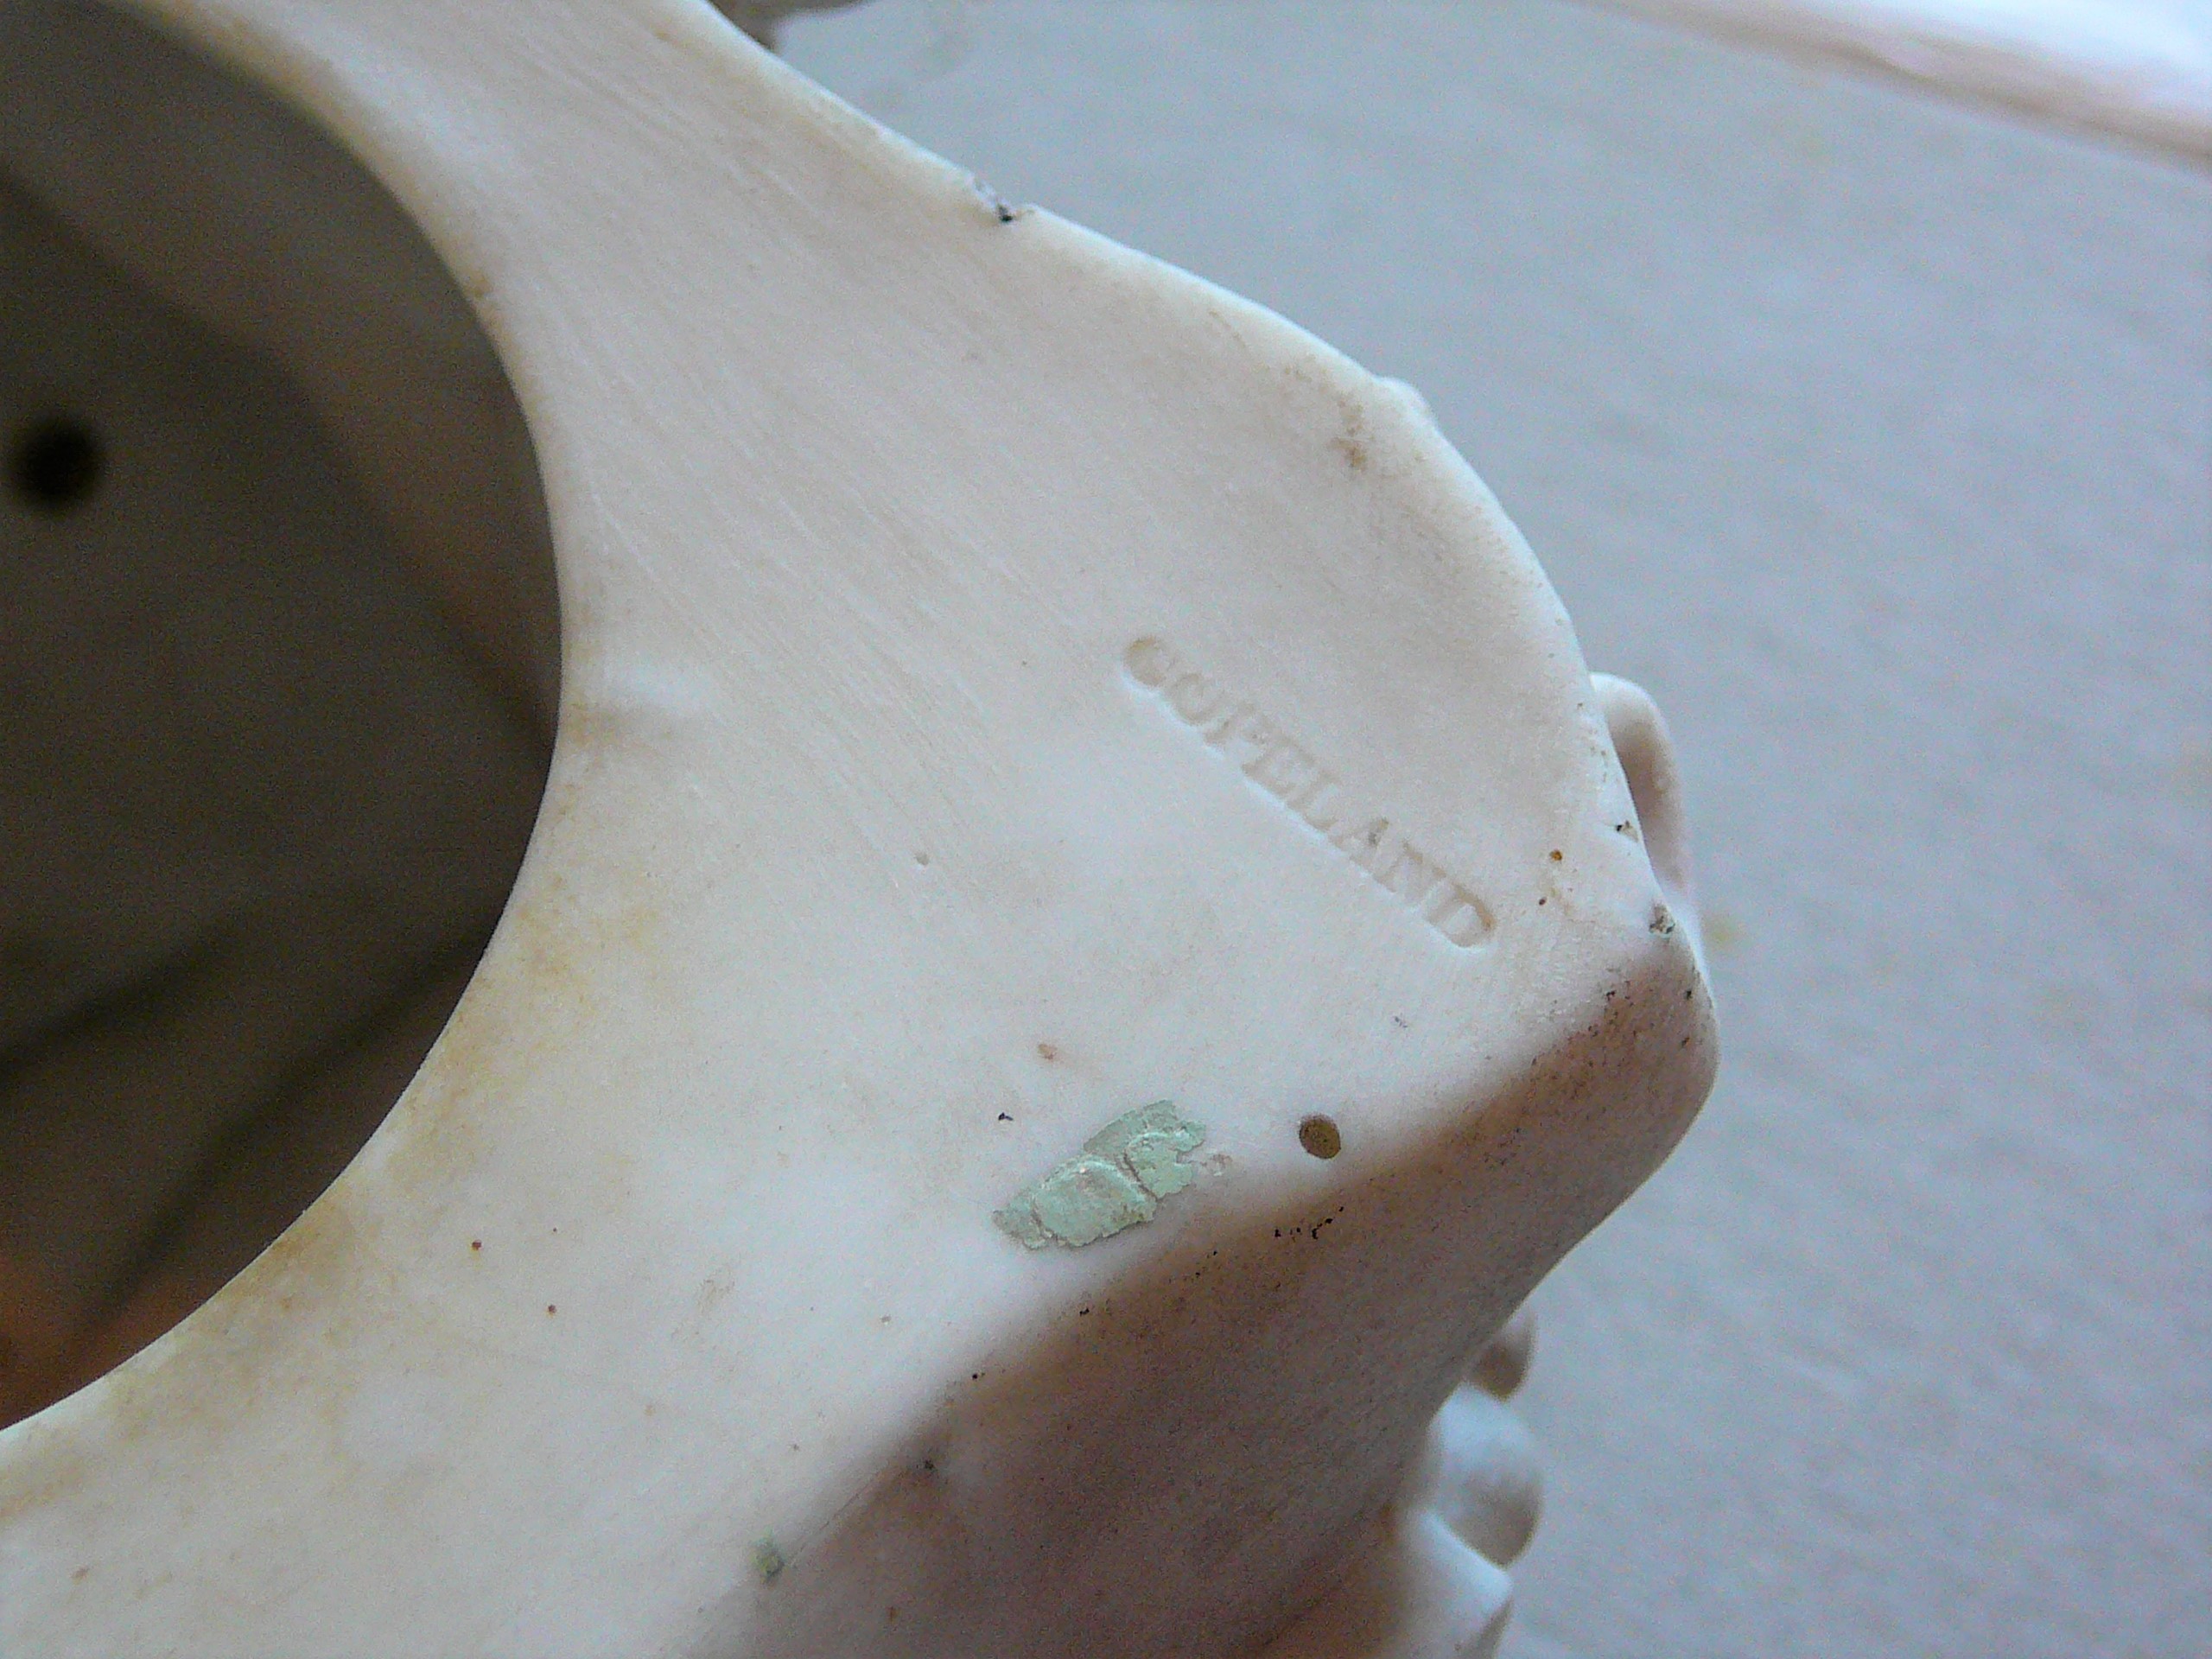 Copeland Parian decorative wall bracket with minor inobtrusive damage to one side. - Image 6 of 6